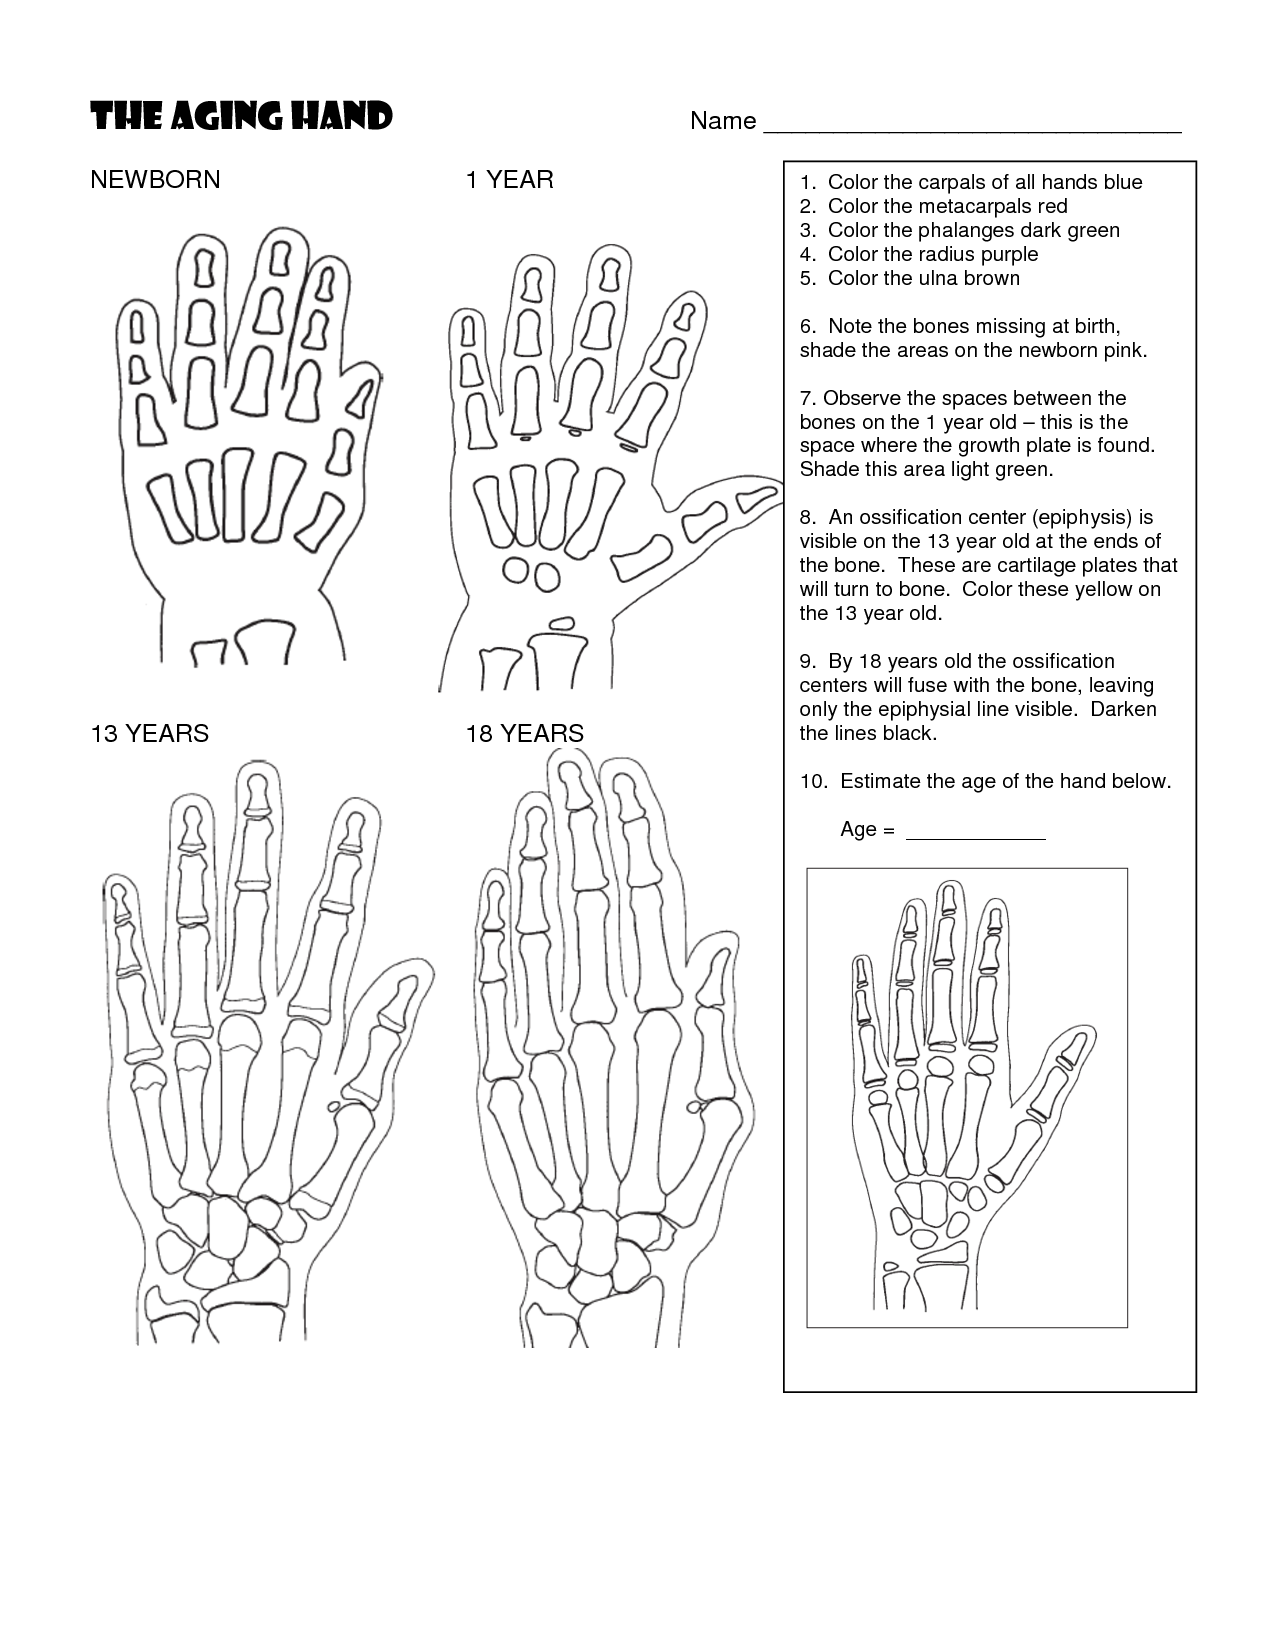 helping hands coloring page helping hands coloring pages for church coloring pages helping page coloring hands 